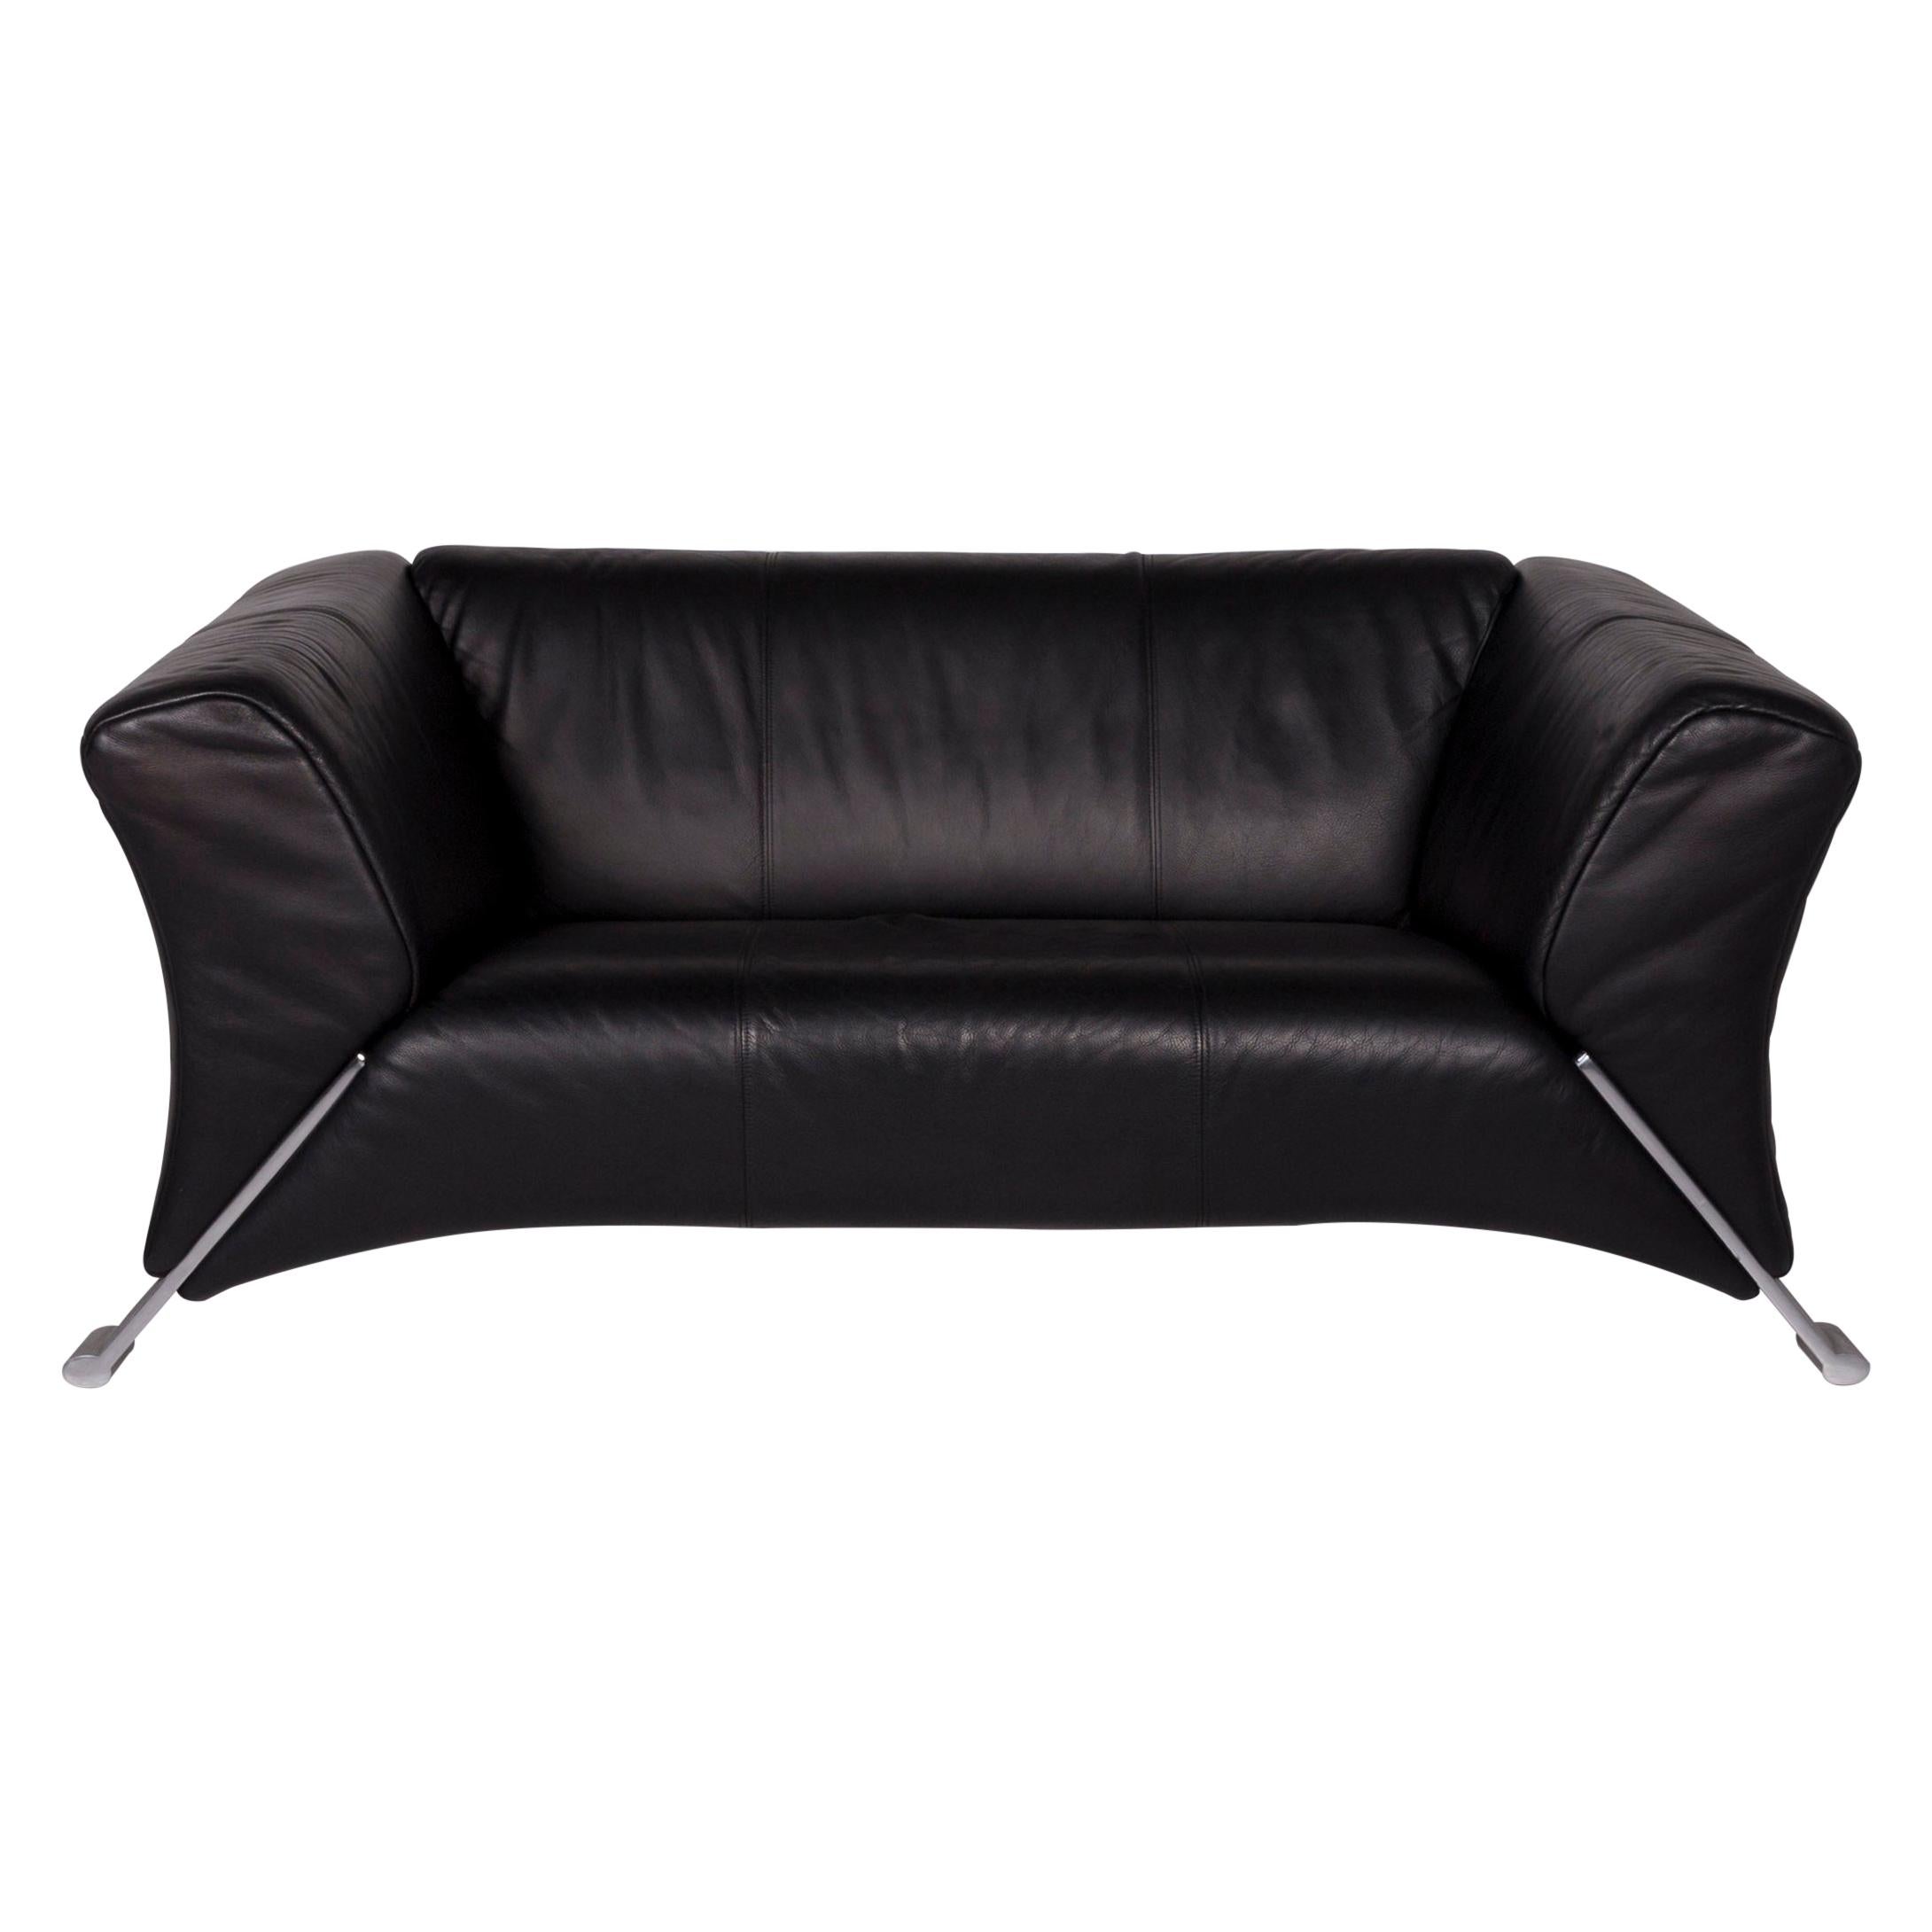 Rolf Benz 322 Leather Sofa Black Two-Seat Couch